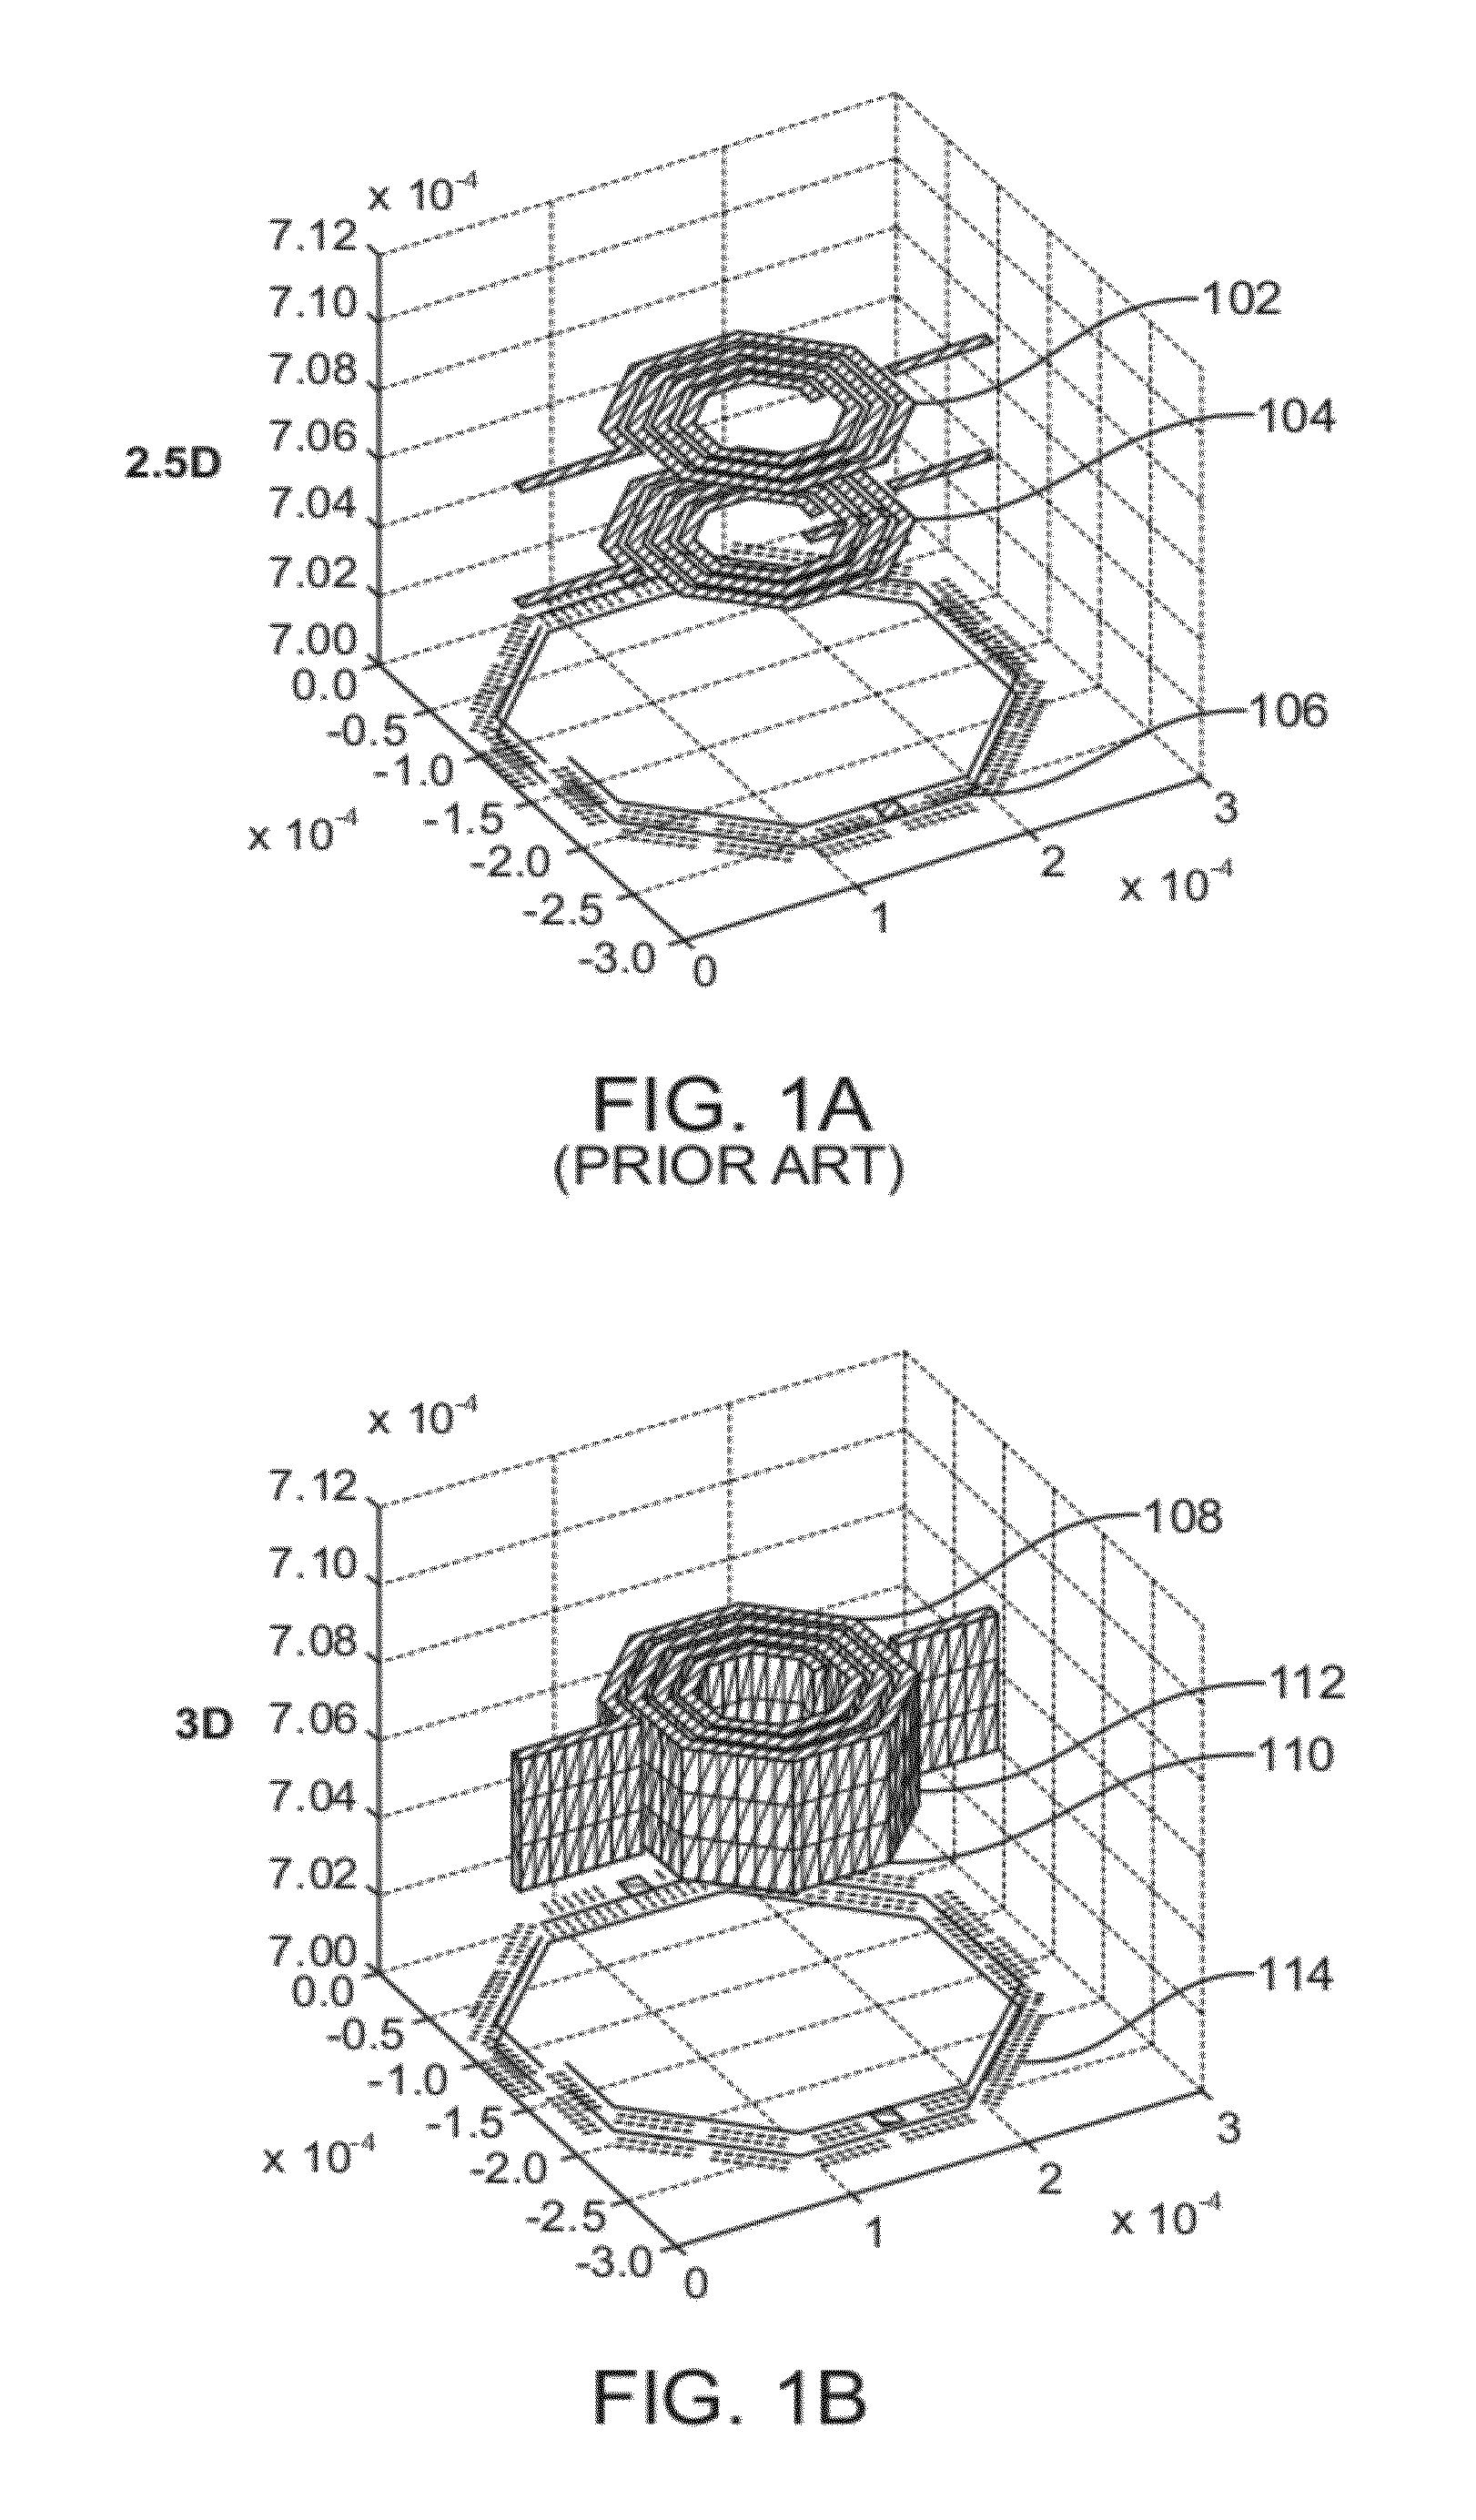 Method and apparatus for broadband electromagnetic modeling of three-dimensional interconnects embedded in multilayered substrates